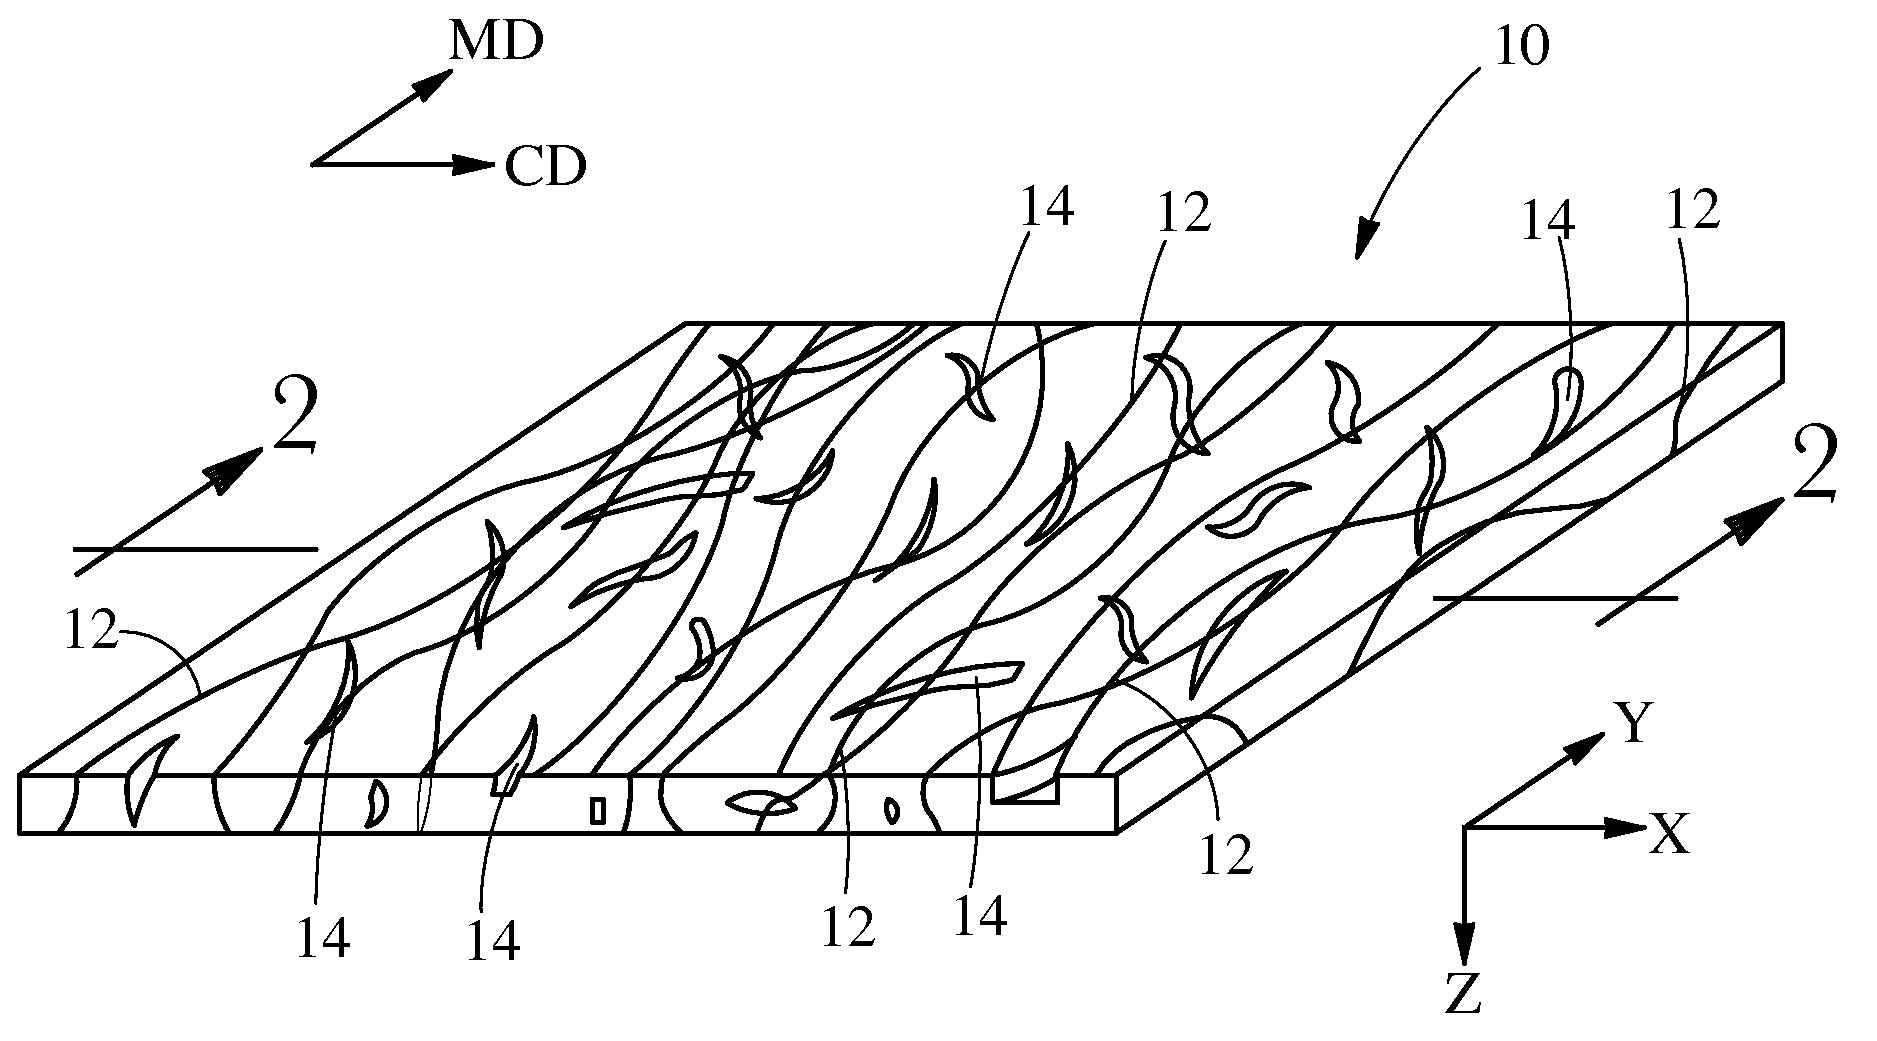 Low lint fibrous structures and methods for making same